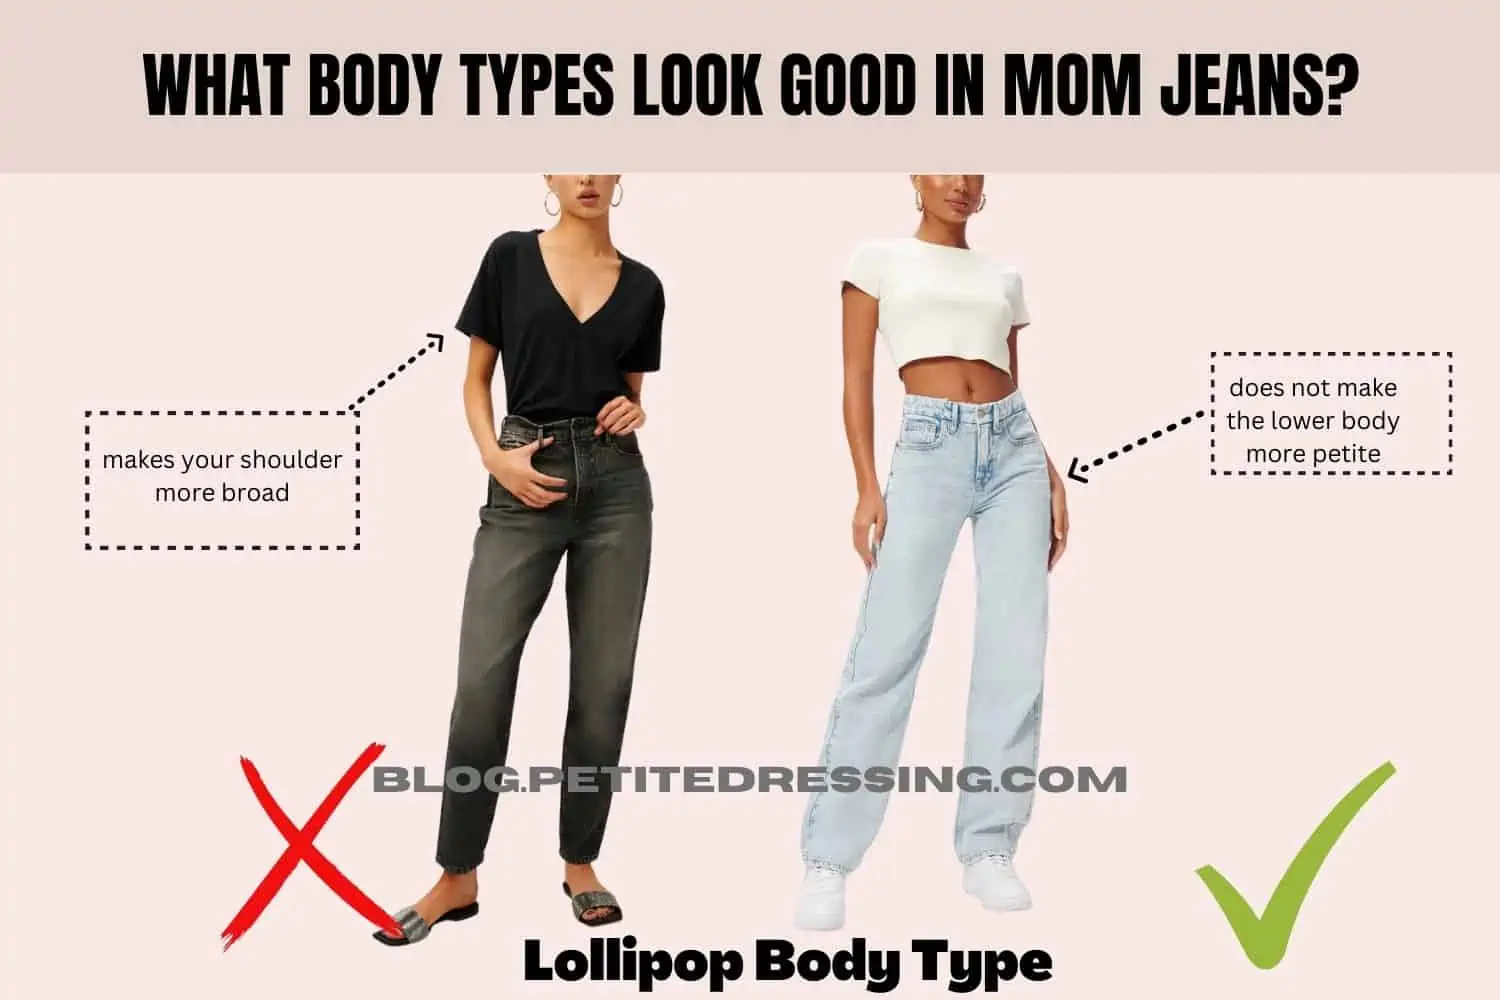 How are mom jeans supposed to fit? - Quora